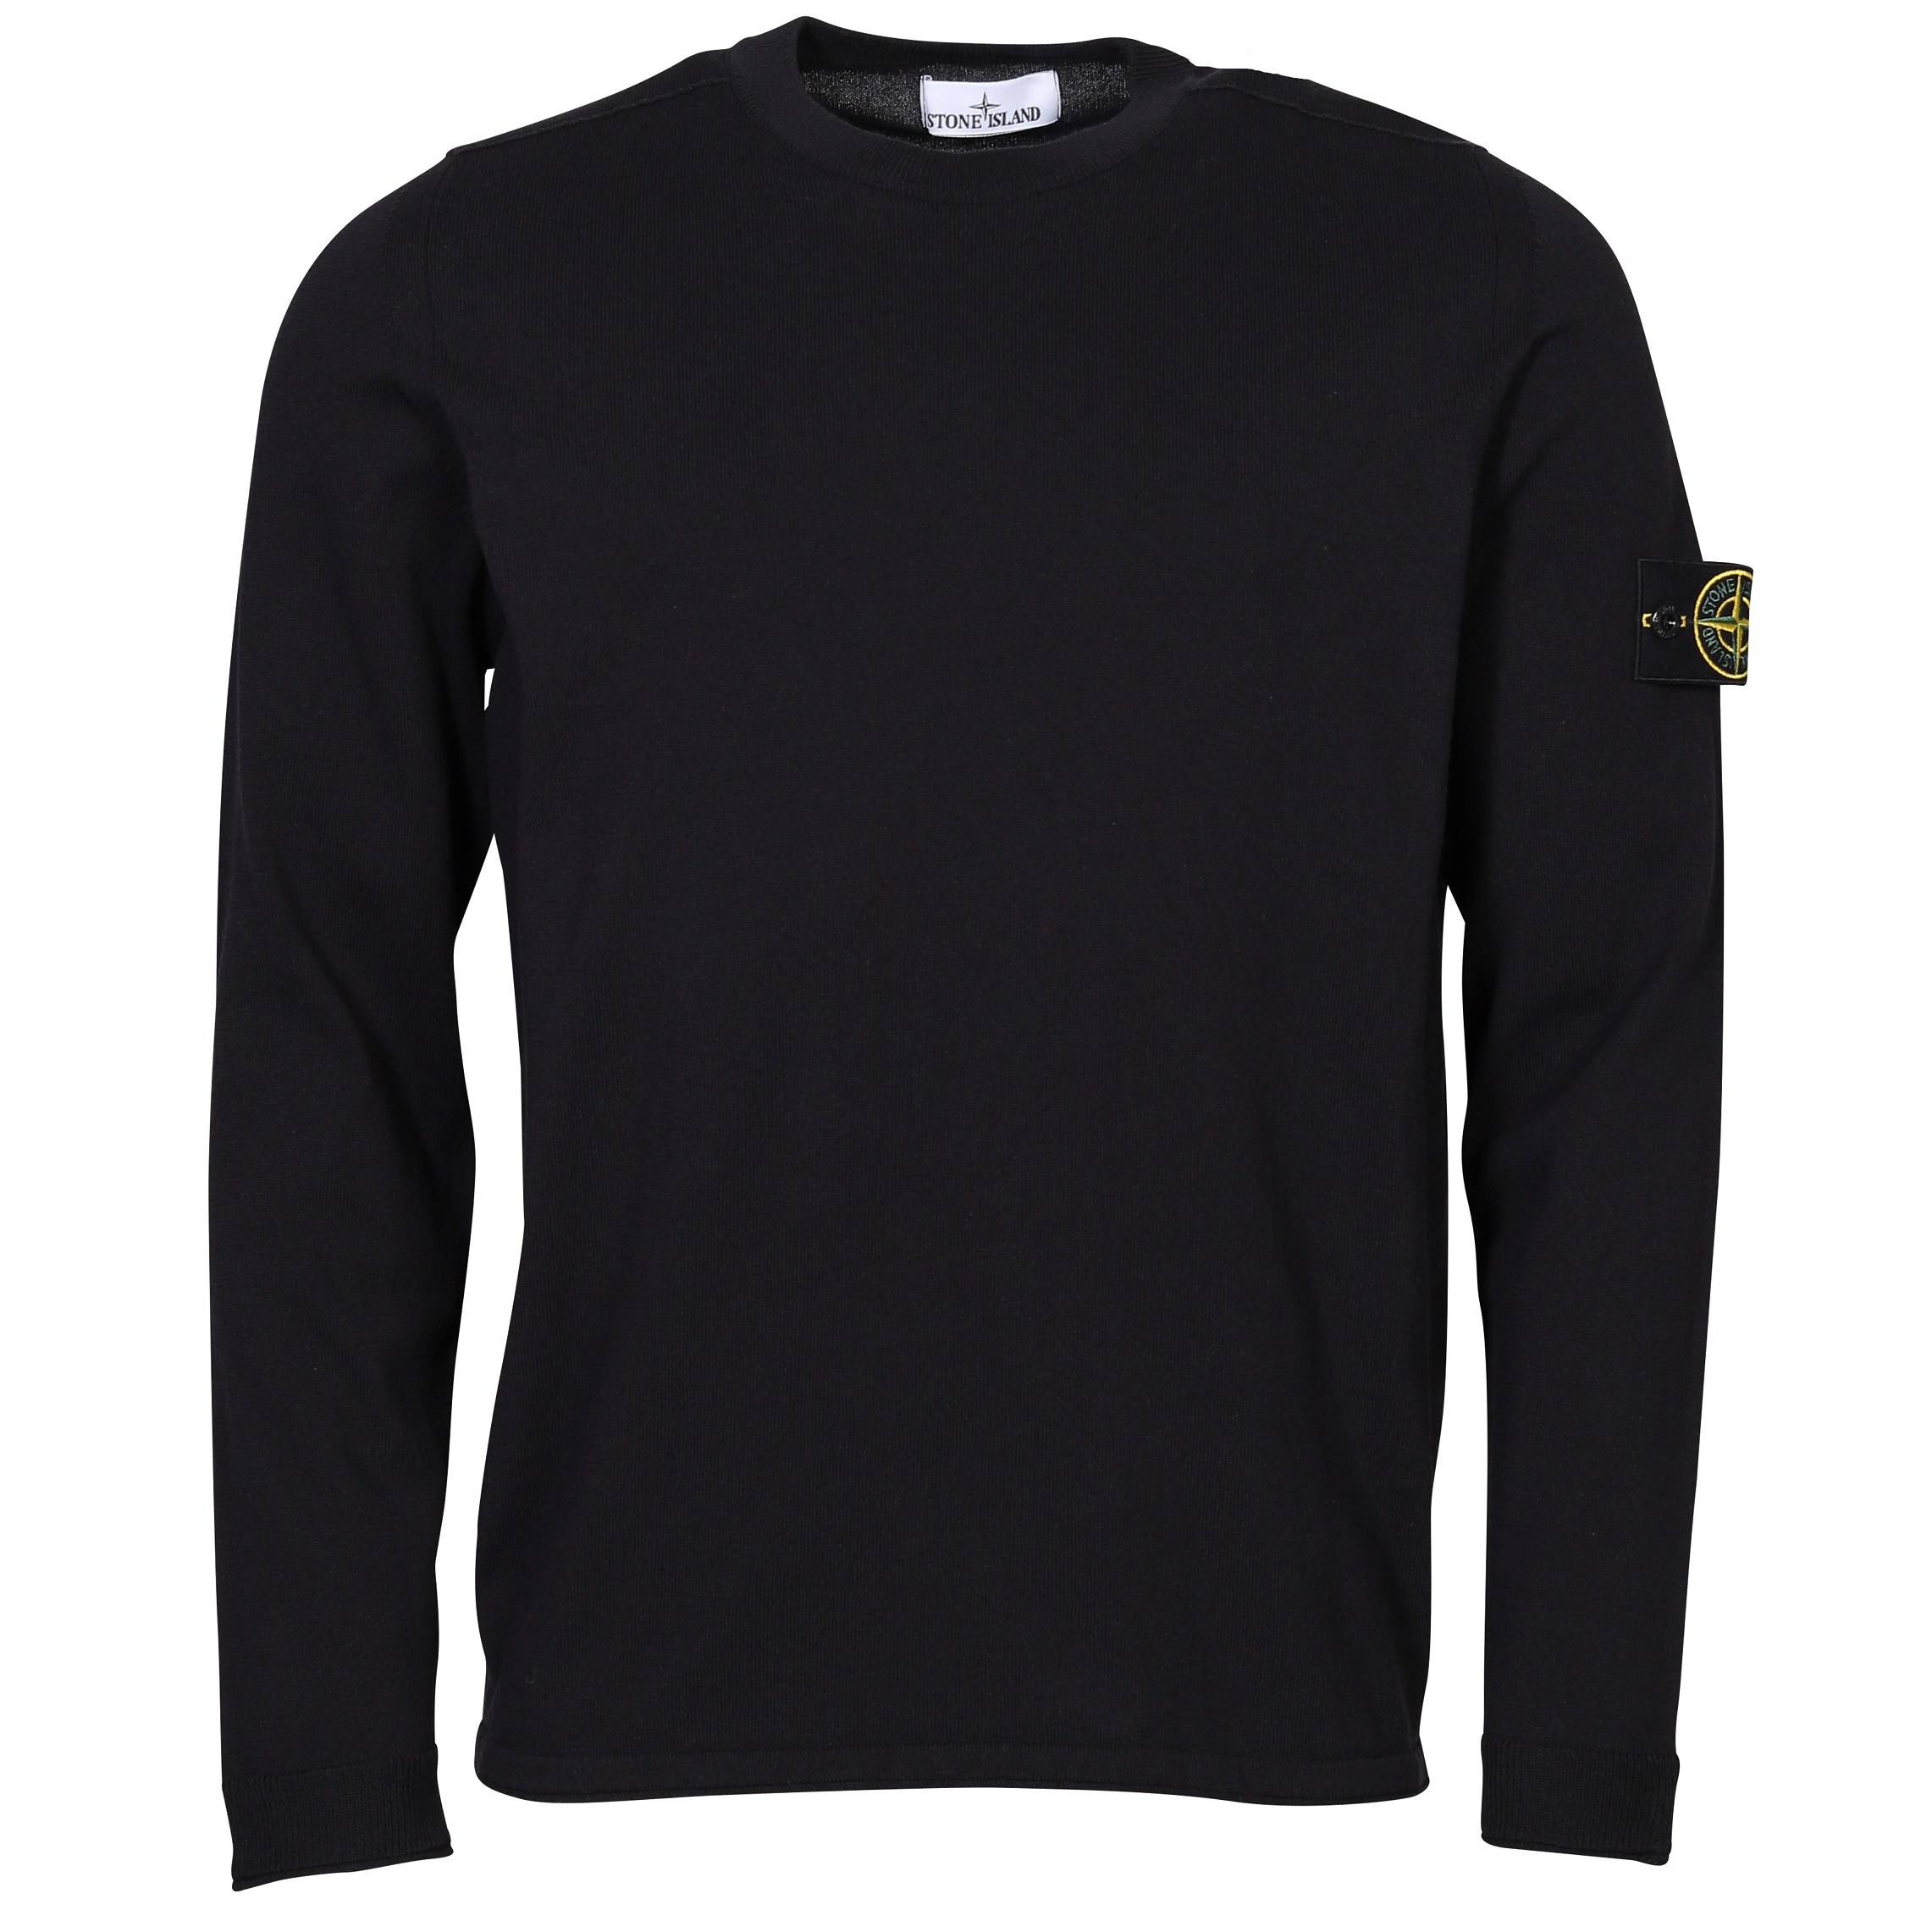 STONE ISLAND Cotton Knit Pullover in Navy Blue M